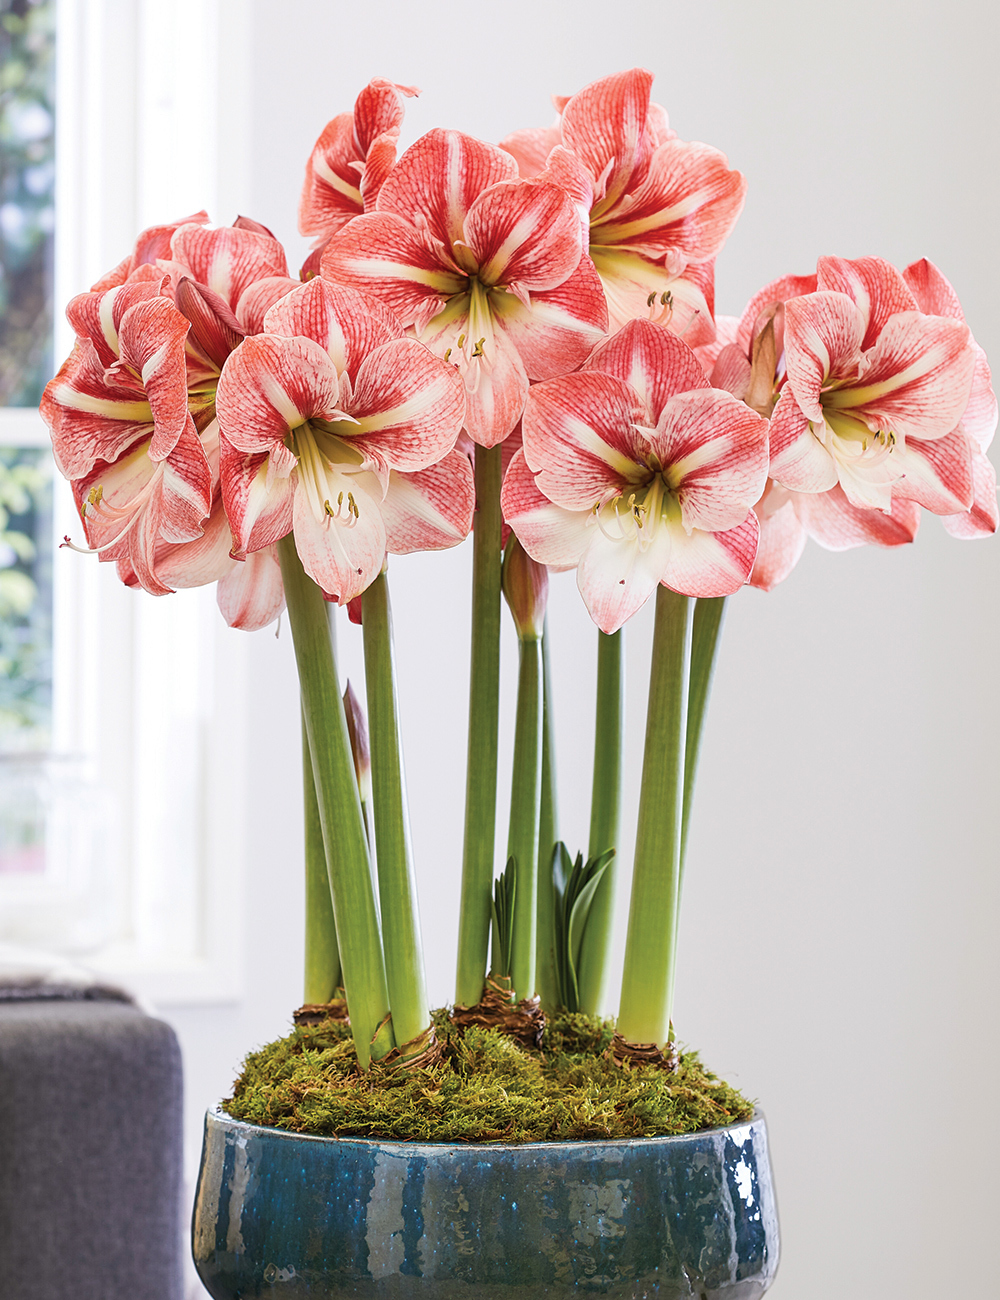 Hippeastrum 'Strong King'